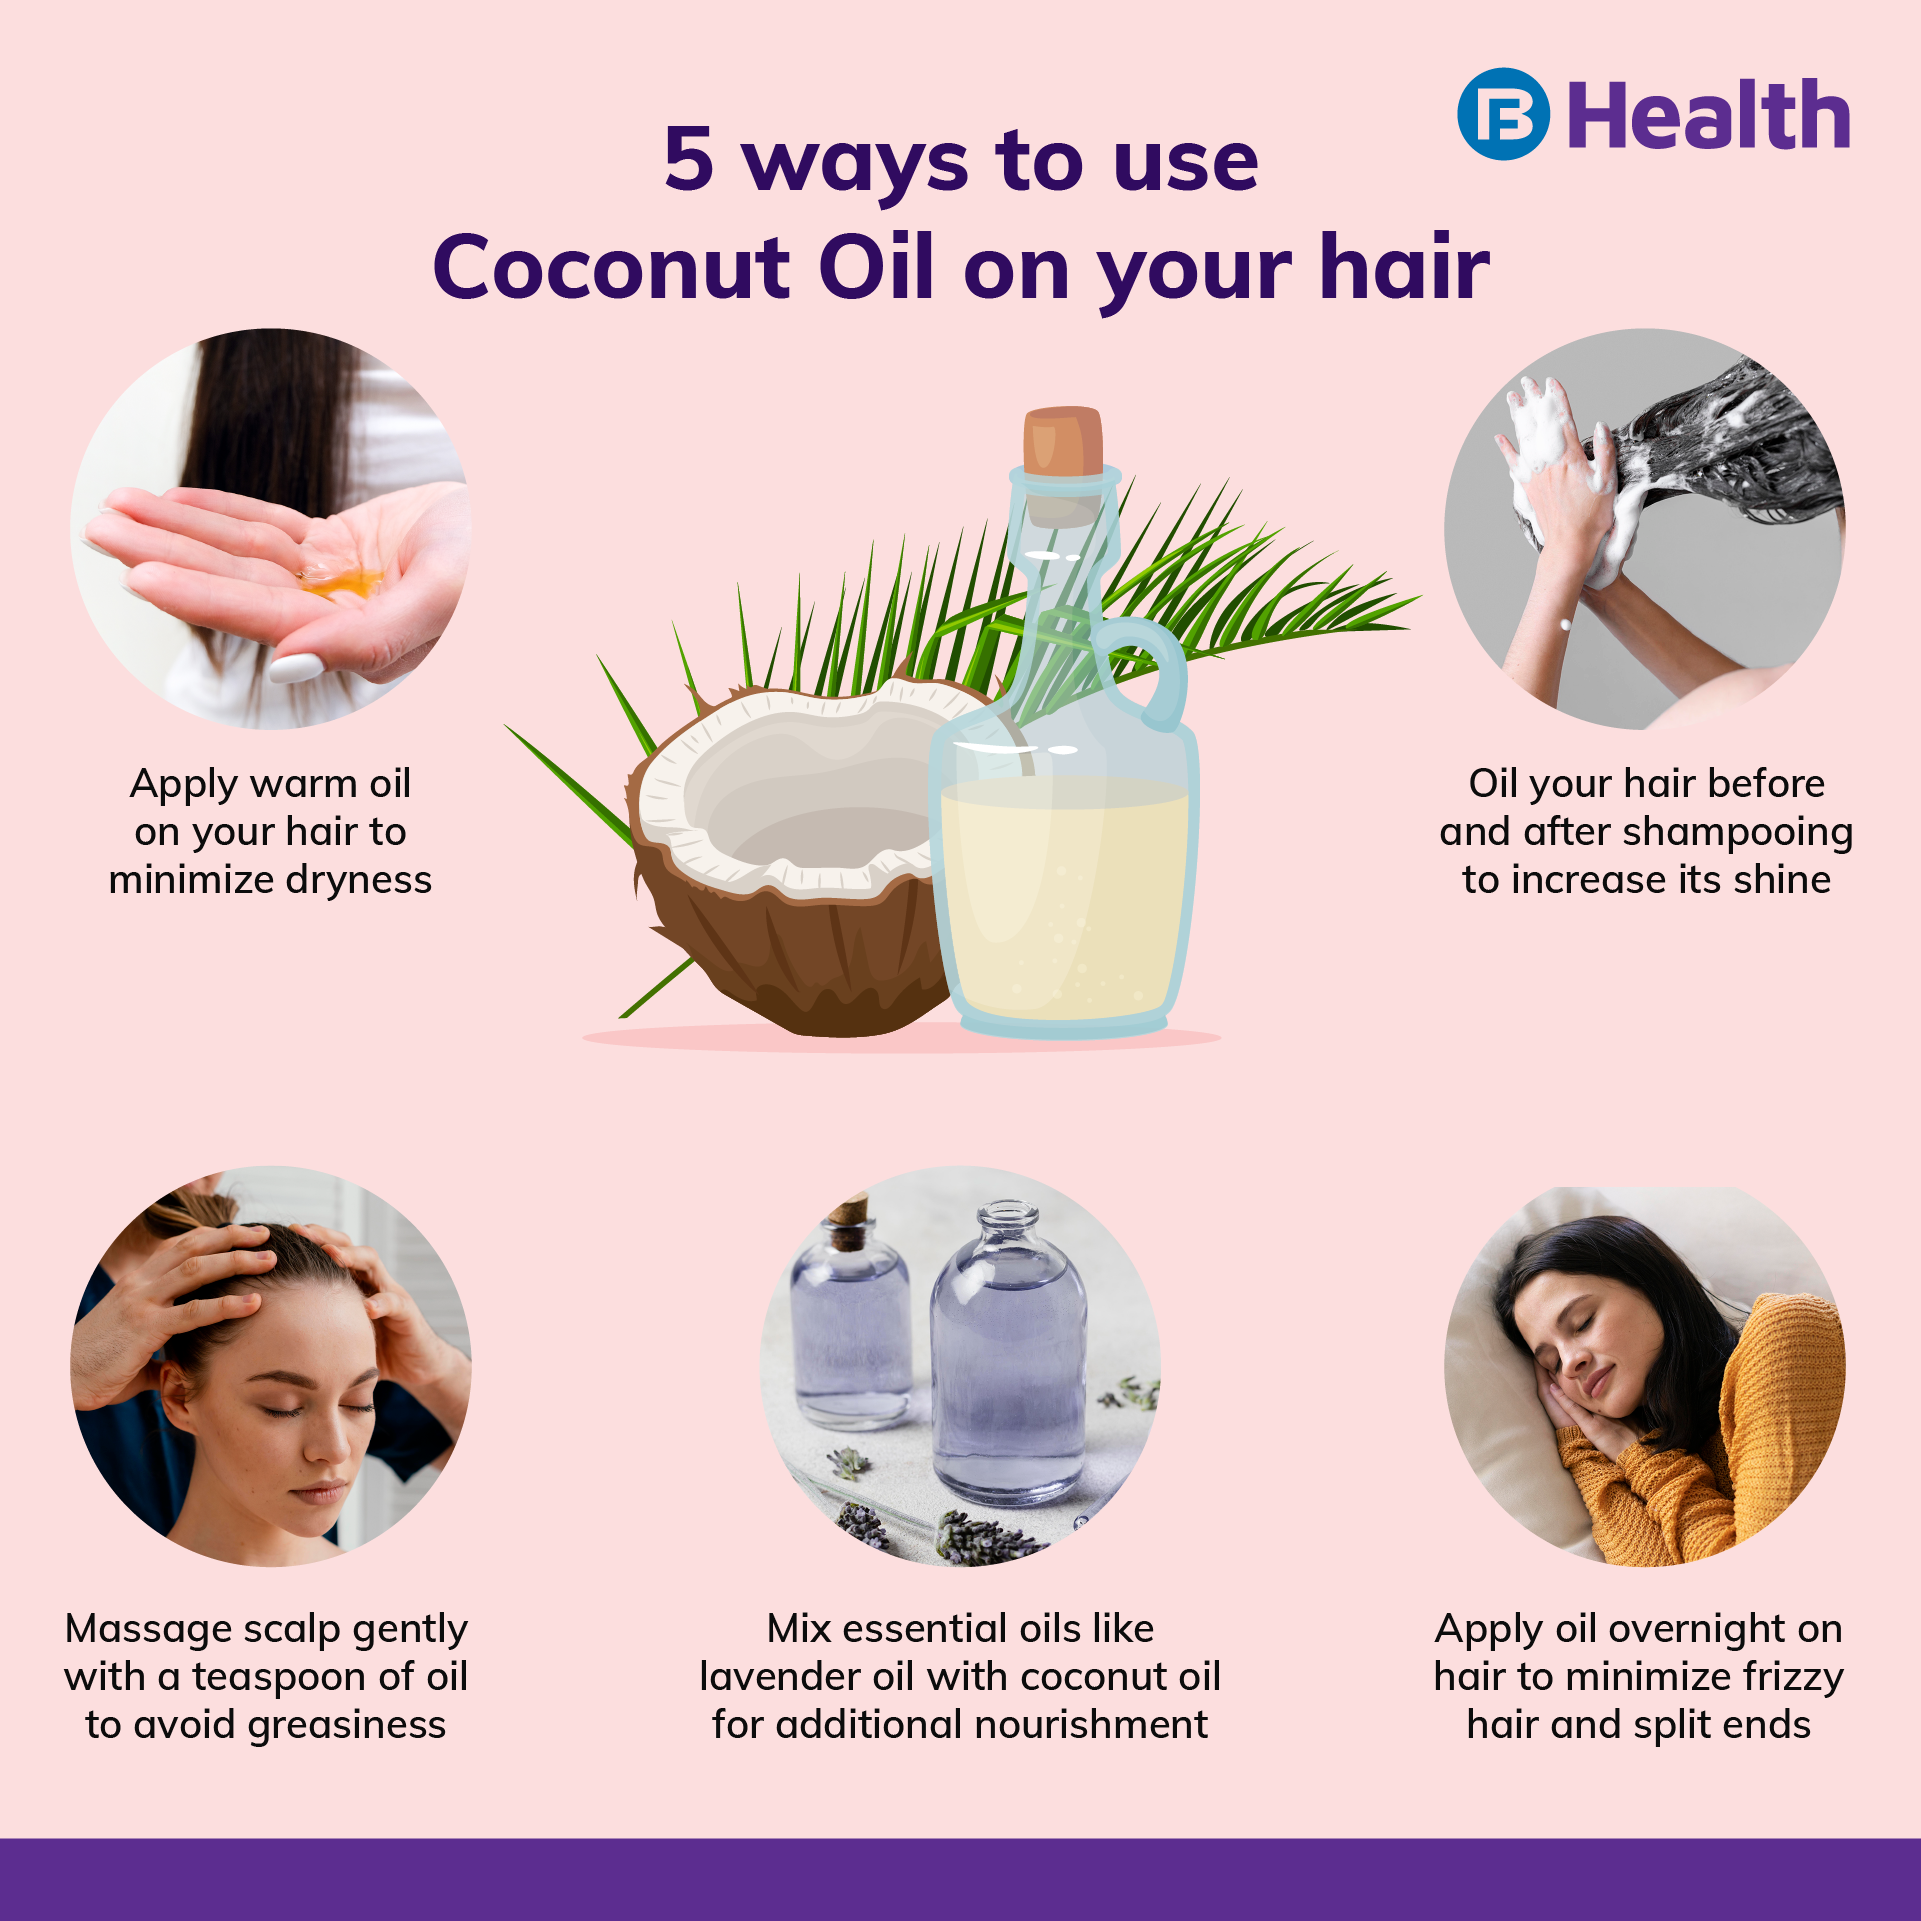 Does eating coconut help hair growth?